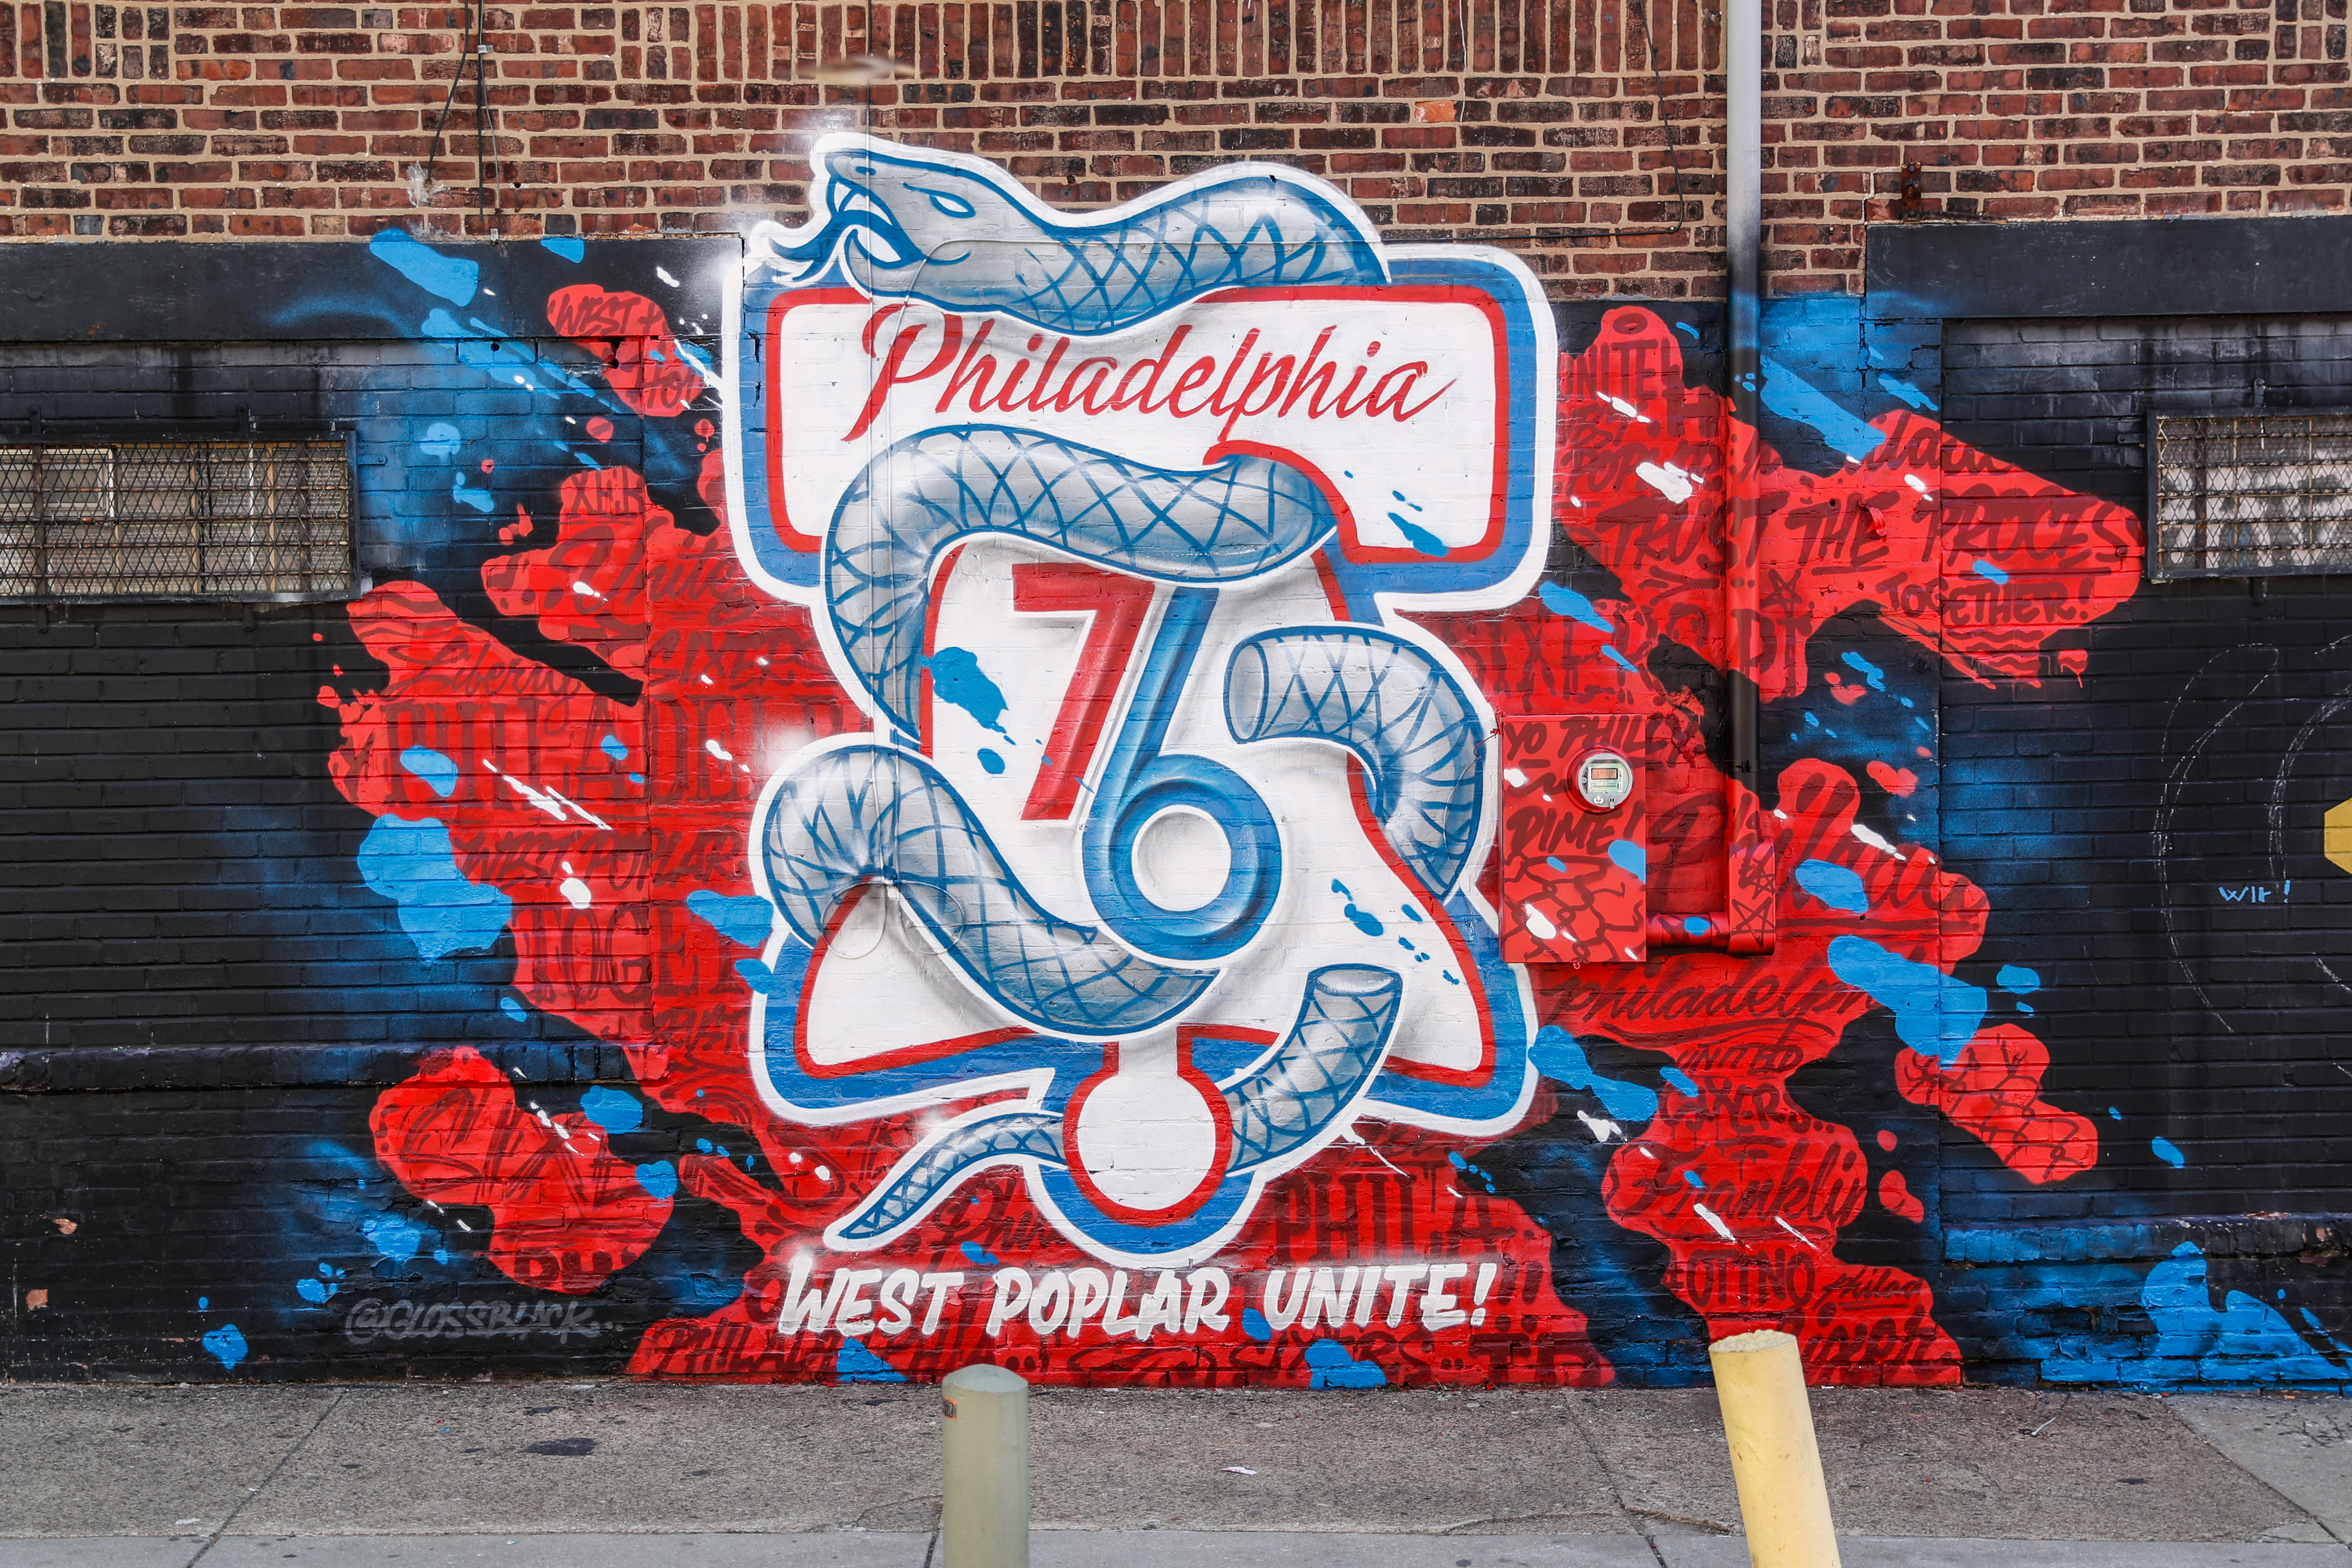 The Sixers are Rolling Out their Playoff Campaign this Morning